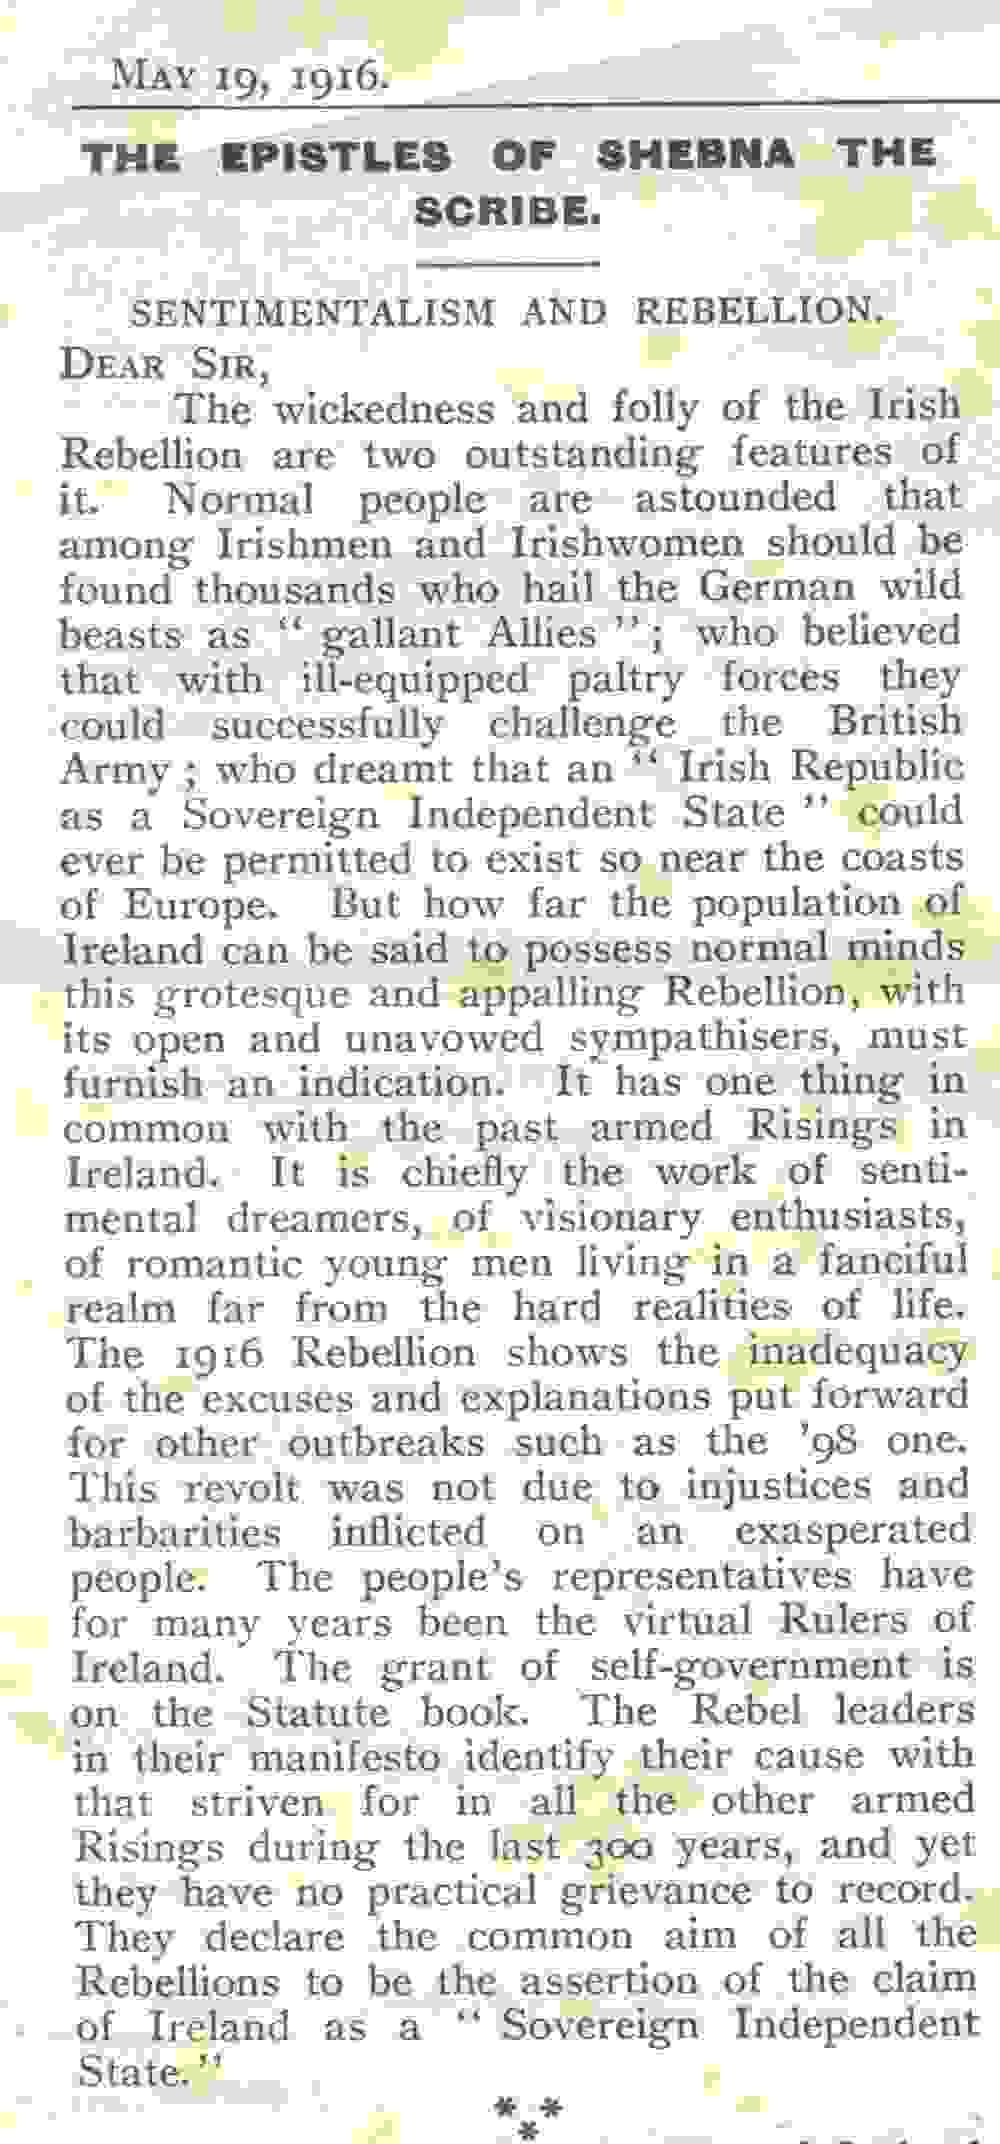 ‘Sentimentalism and Rebellion', being the Epistle of Shebna the Scribe, as published in the Church of Ireland Gazette, 19 May 1916, RCB Library MS 813/4/3.